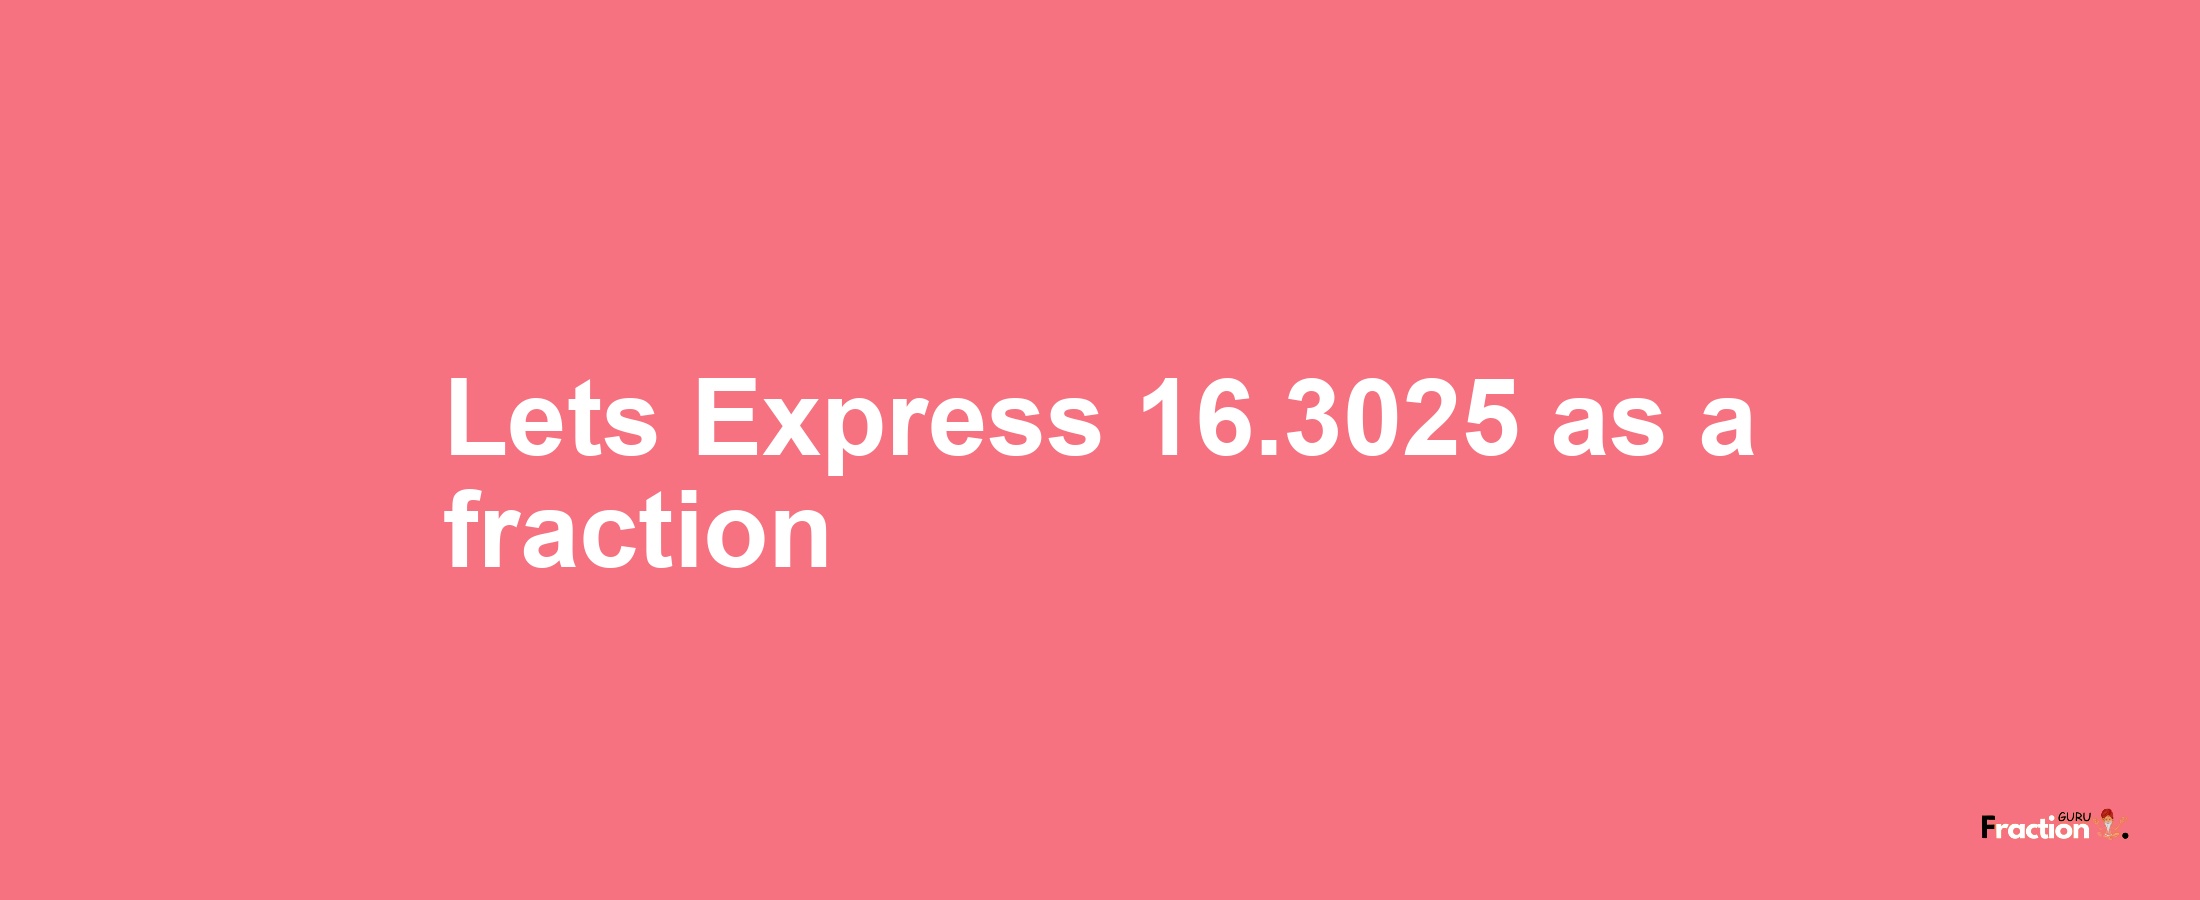 Lets Express 16.3025 as afraction